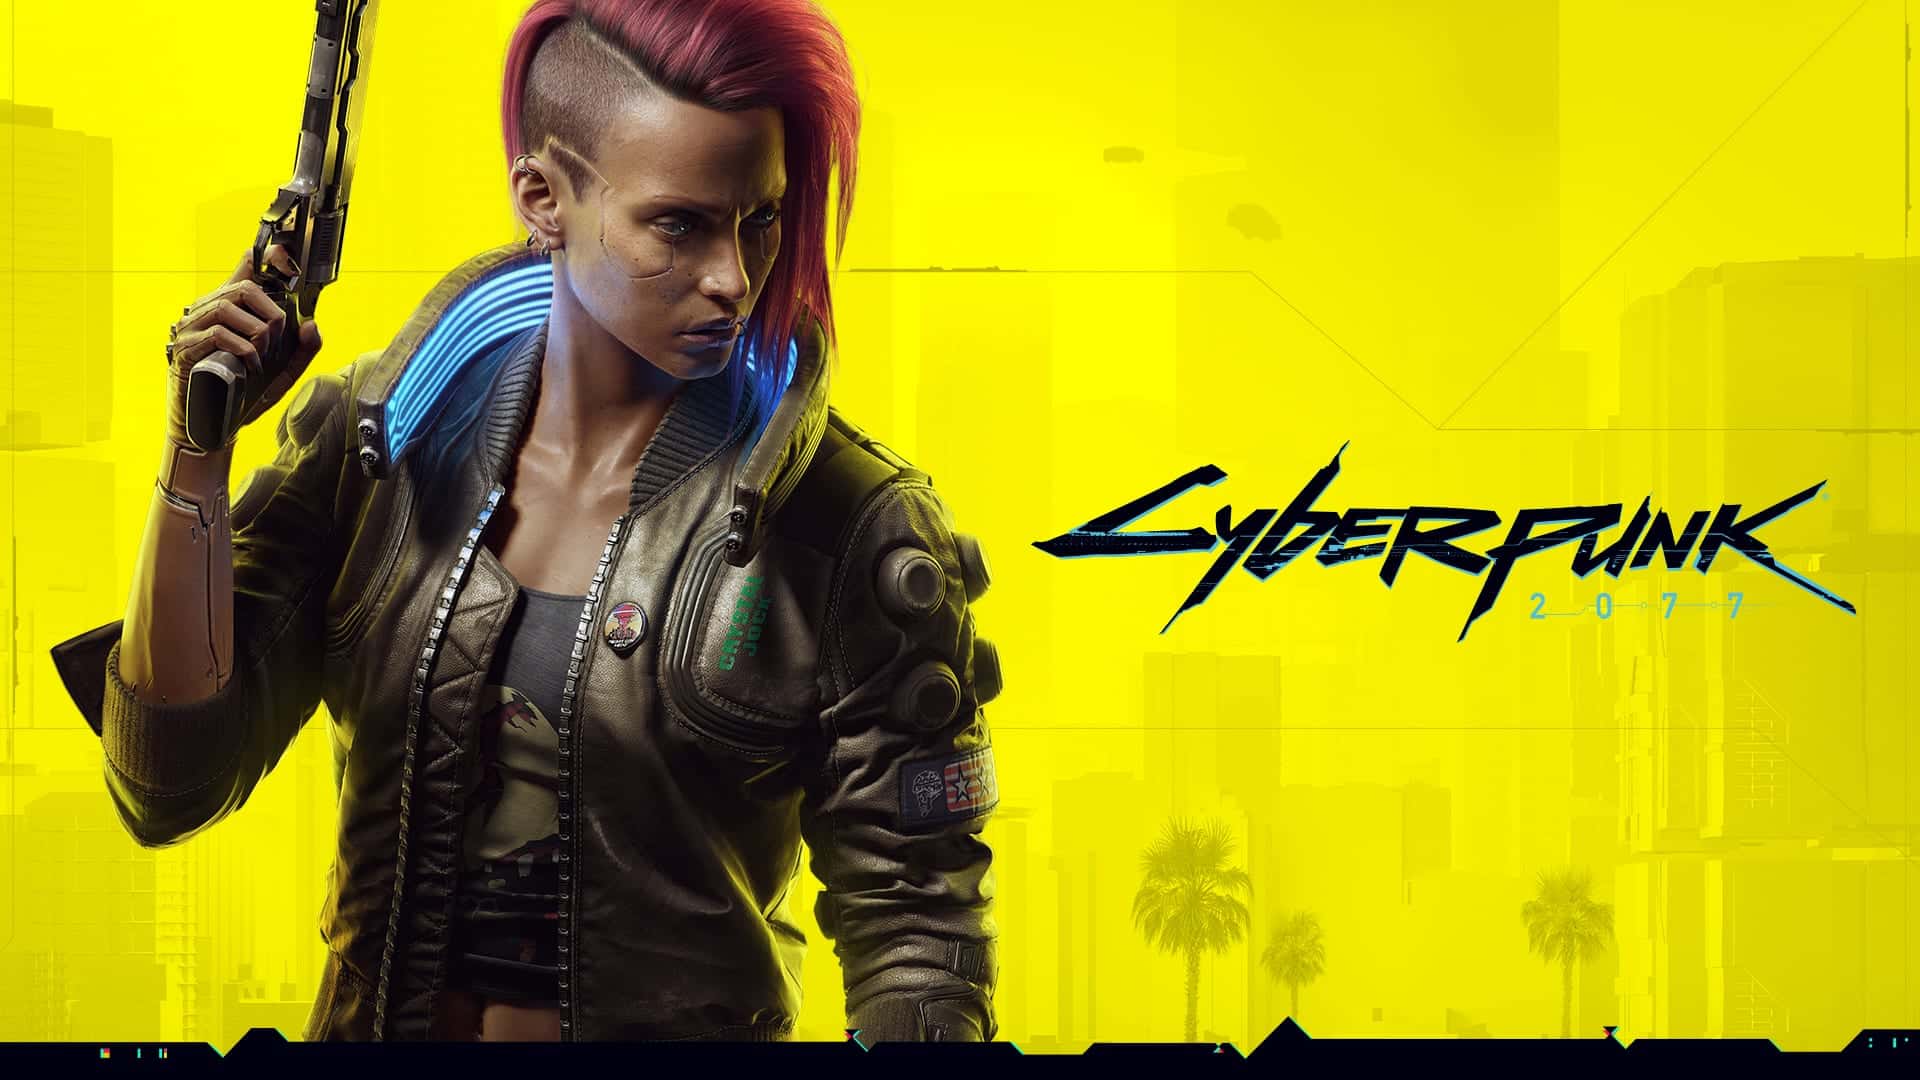 Cyberpunk 2077 Xbox Series X Version Spotted Ahead of Today’s Stream